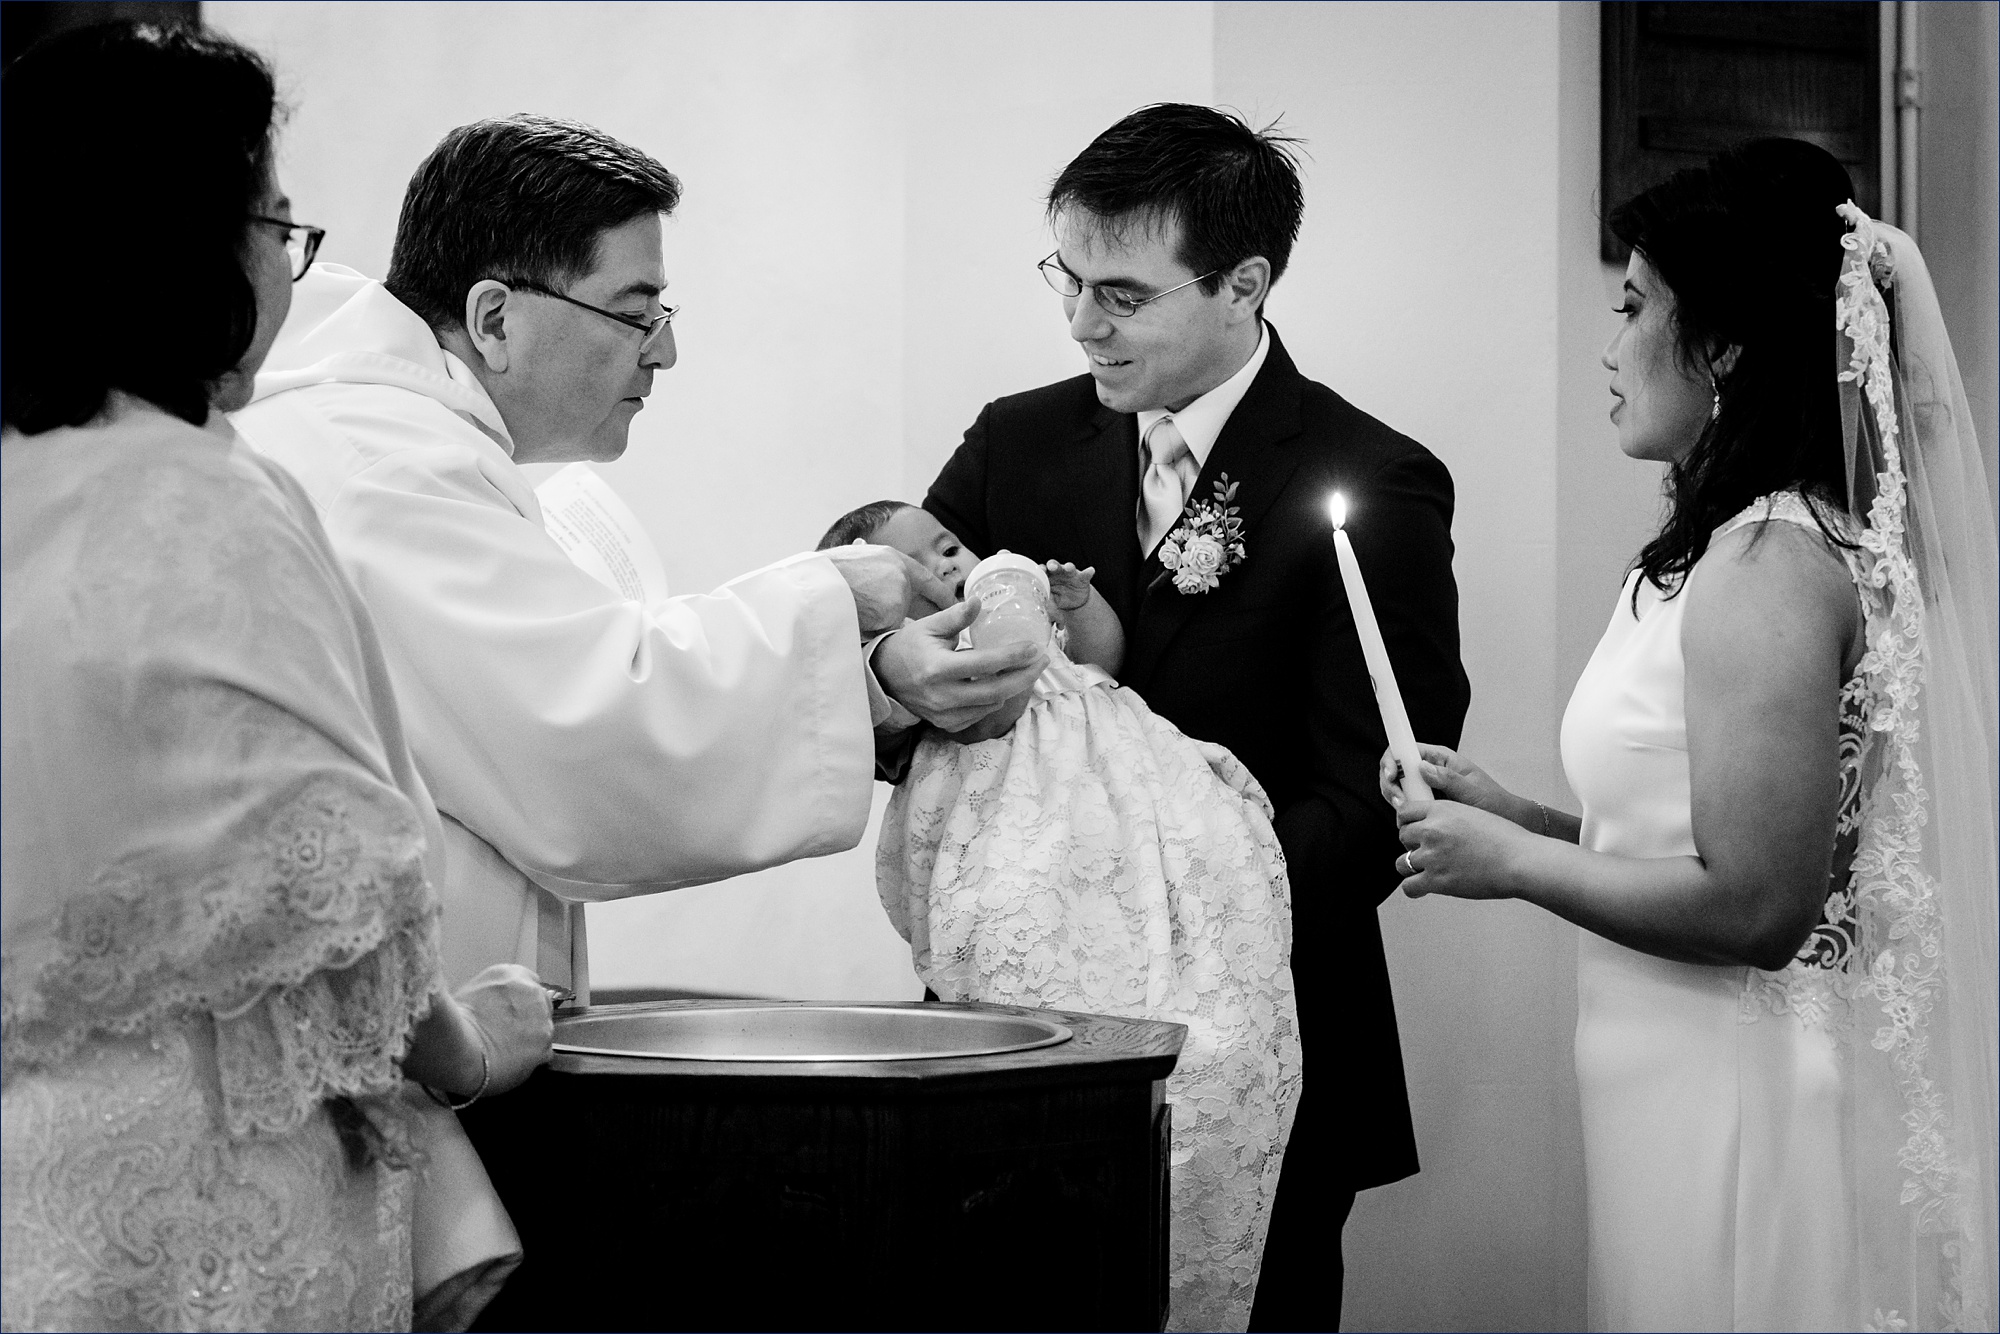 The newlyweds have their daughter baptized as part of their elopement ceremony in New Hampshire